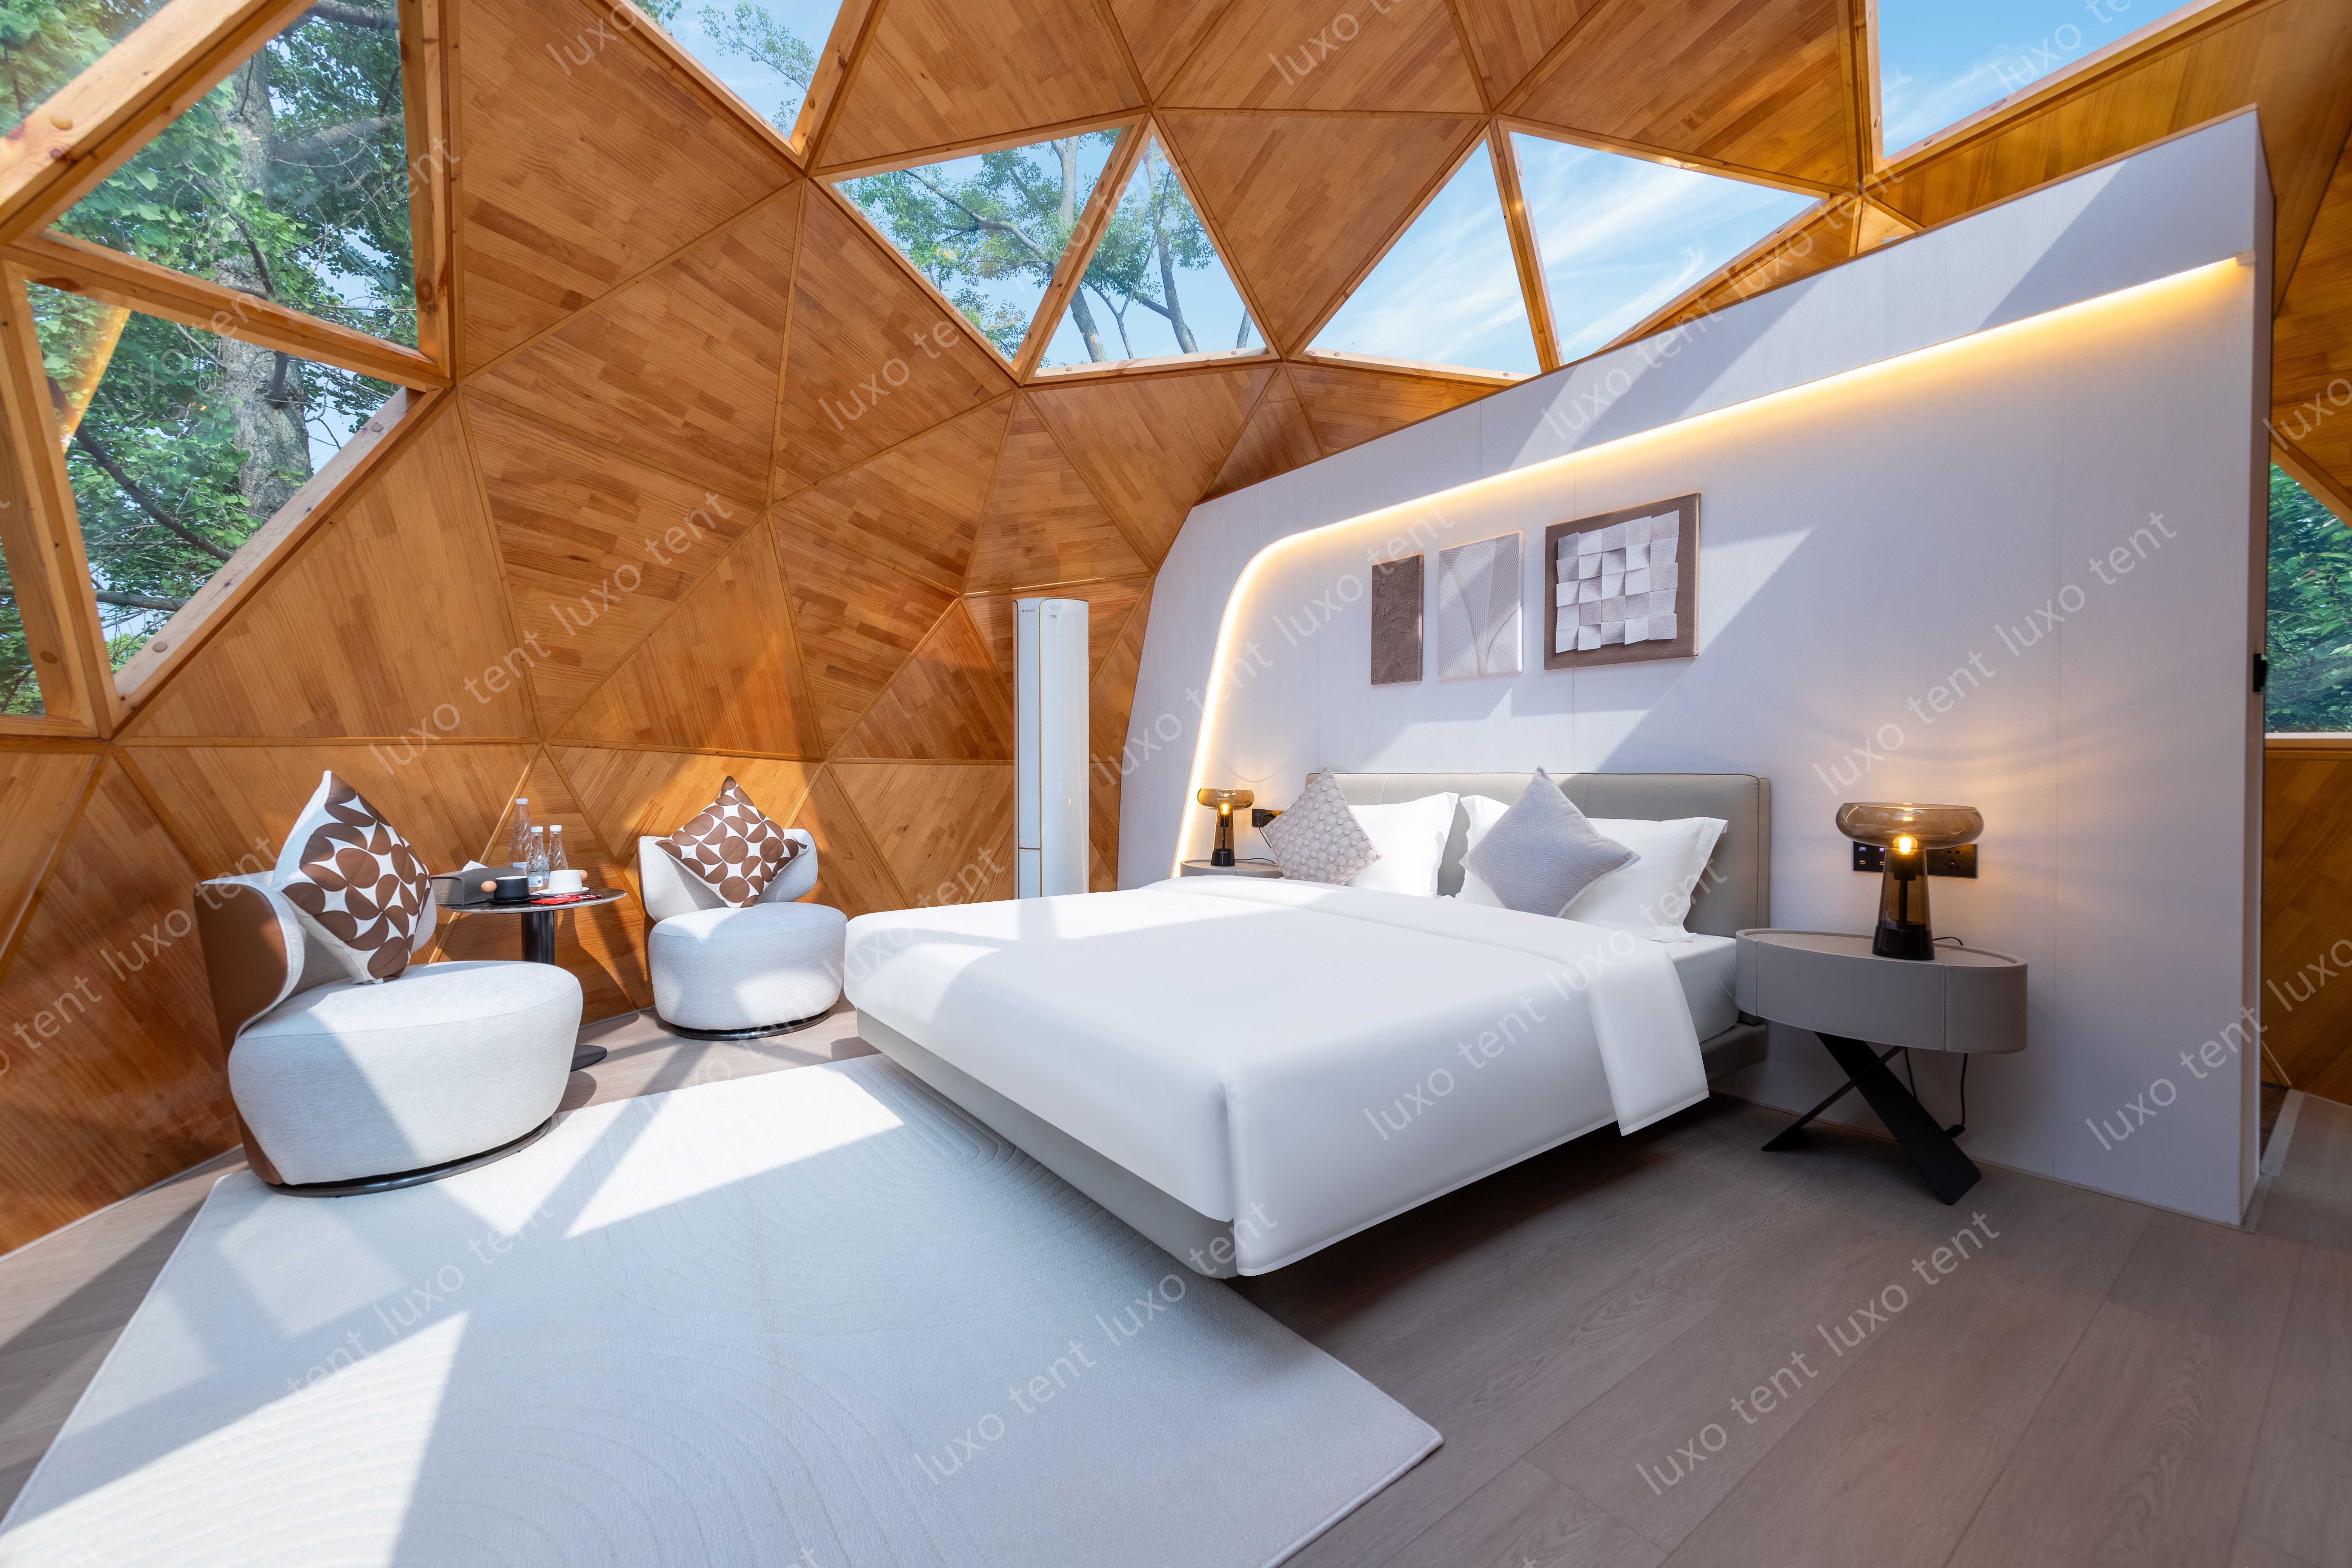 glass dome tent room